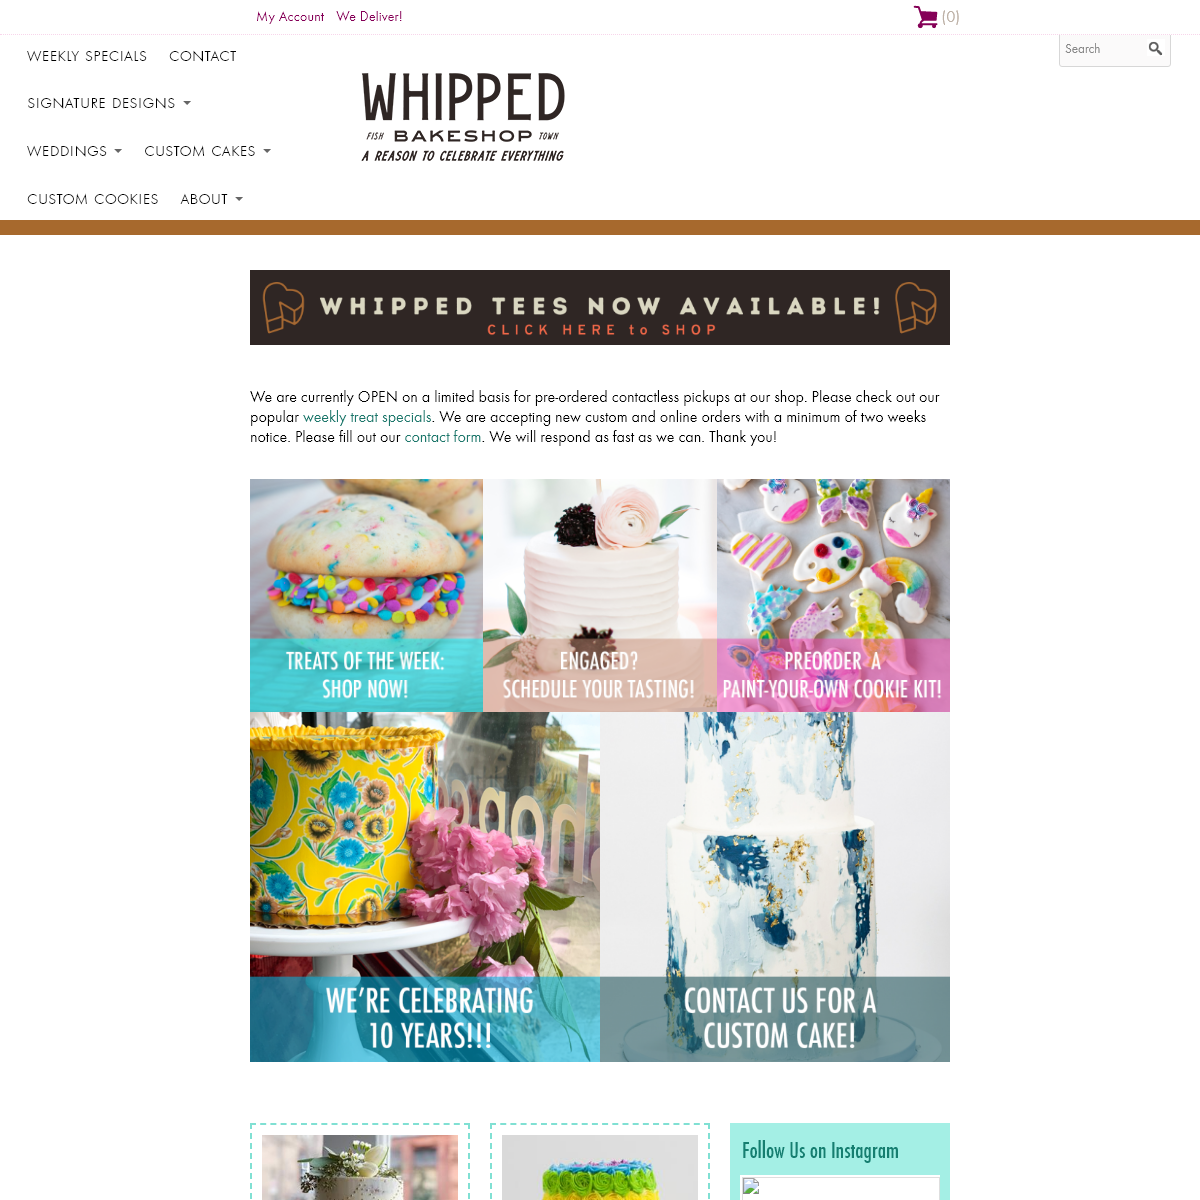 A complete backup of whippedbakeshop.com